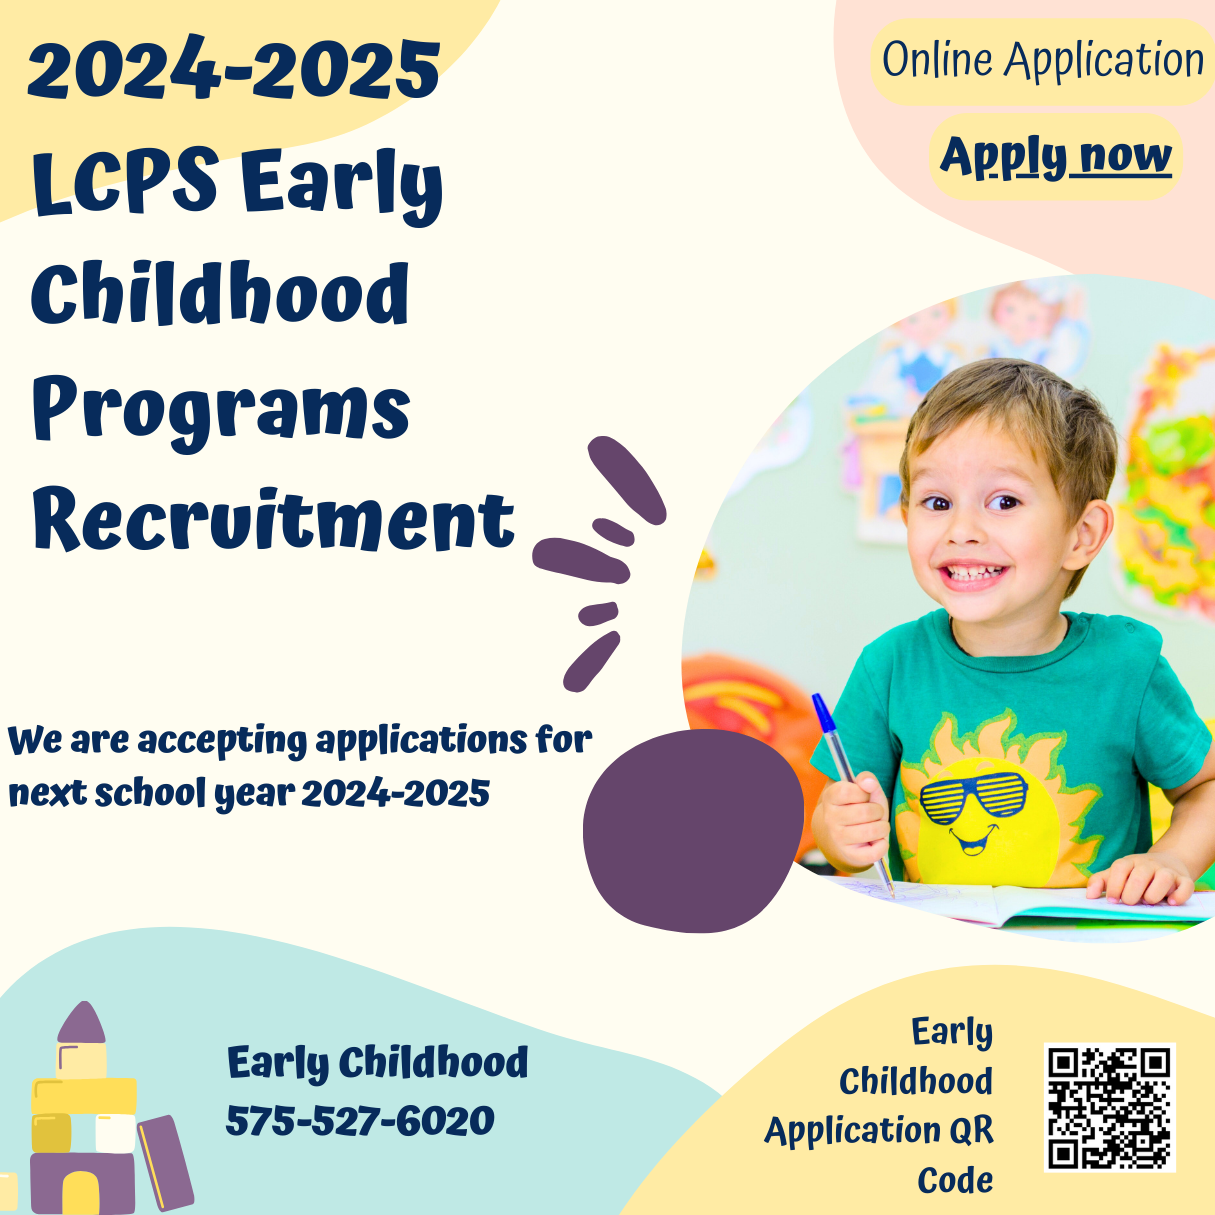 We are accepting applications for next school year 2024-2025. For NM PreK, your child must be 4 years old before Sept. 1, 2024. For Head Start, your child must be 3 or 4 years old before Sept 1, 2024